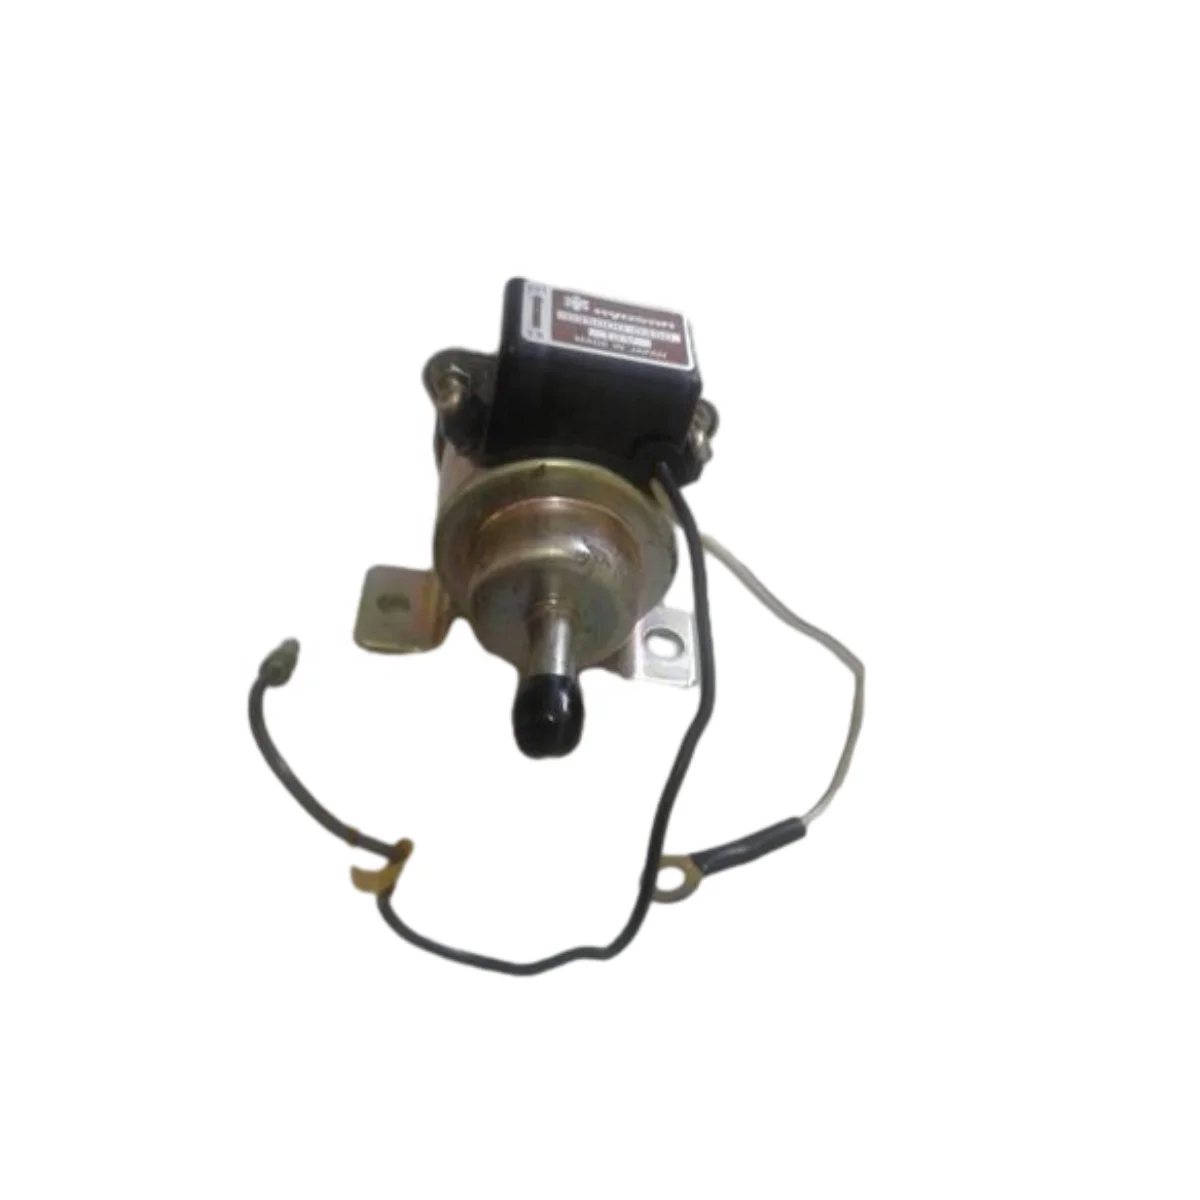 

Replacement Holdwell 923-592 Fuel pump electrical for KH6-1S MR2-160/2 K6-1S KH9-1S K8-1S